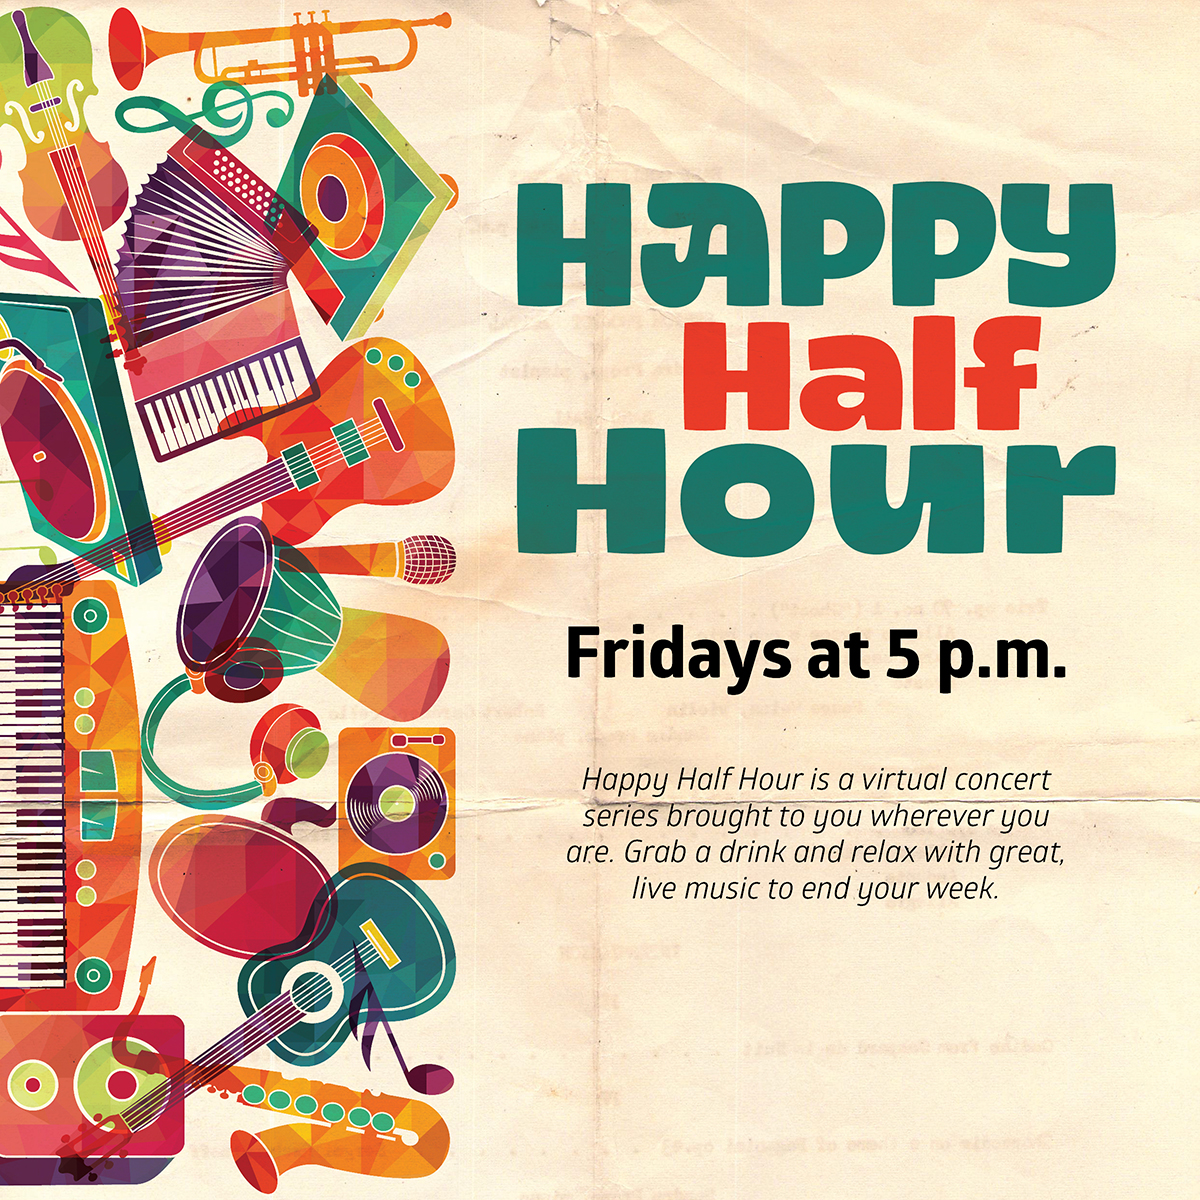 happy half hour image with illustrated instruments